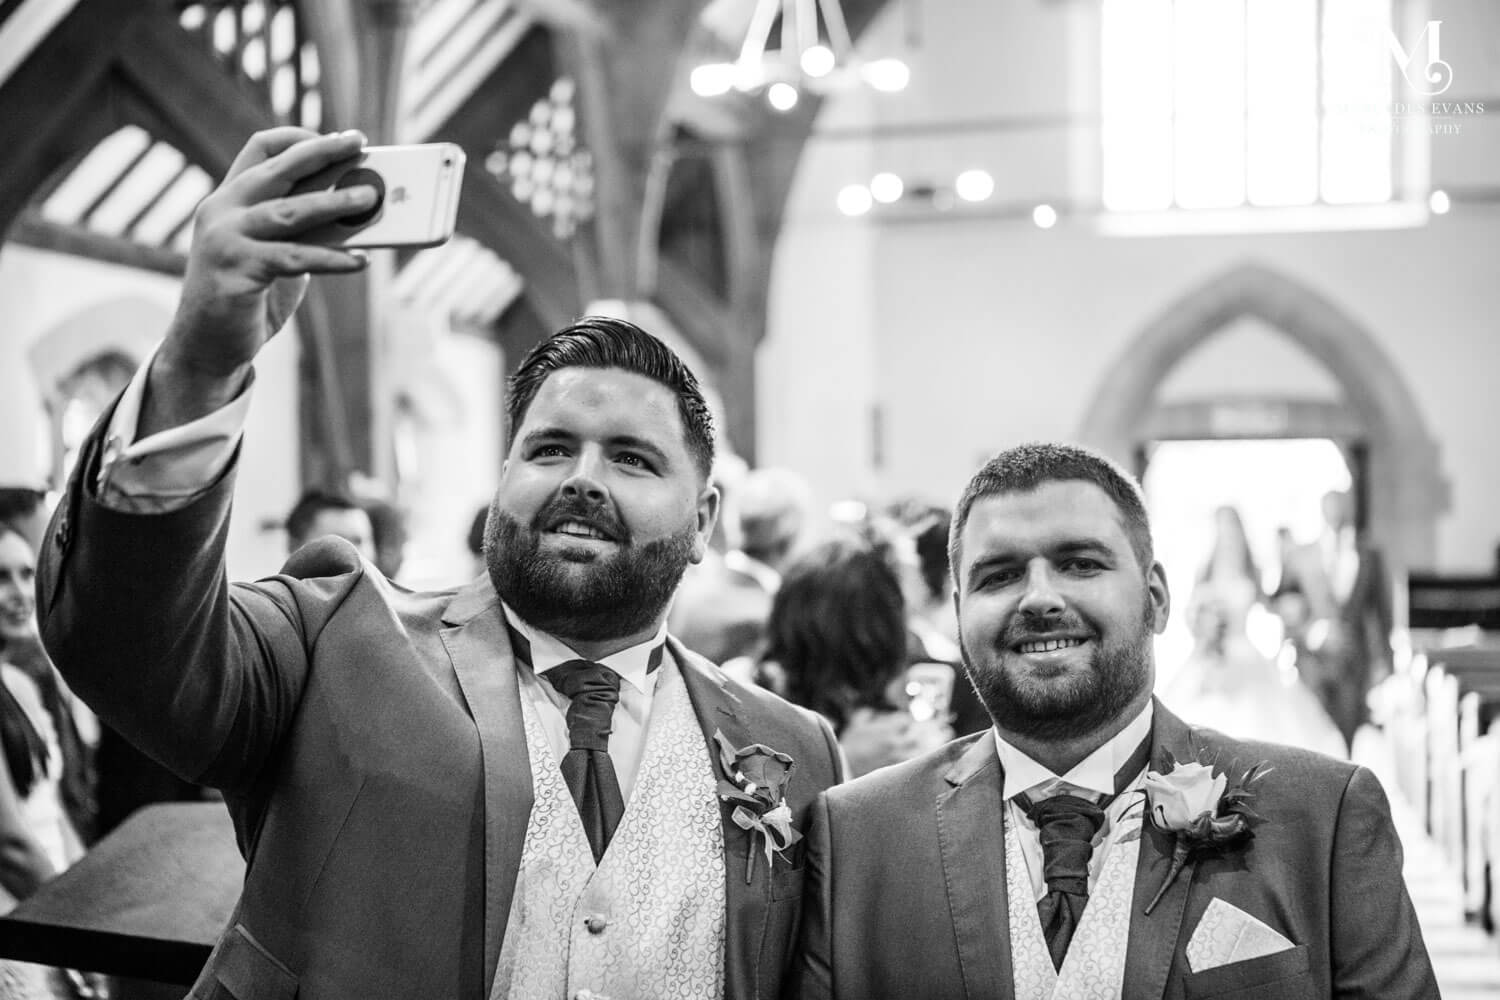 The best man and groom take a selfie as the bride walks up the aisle 